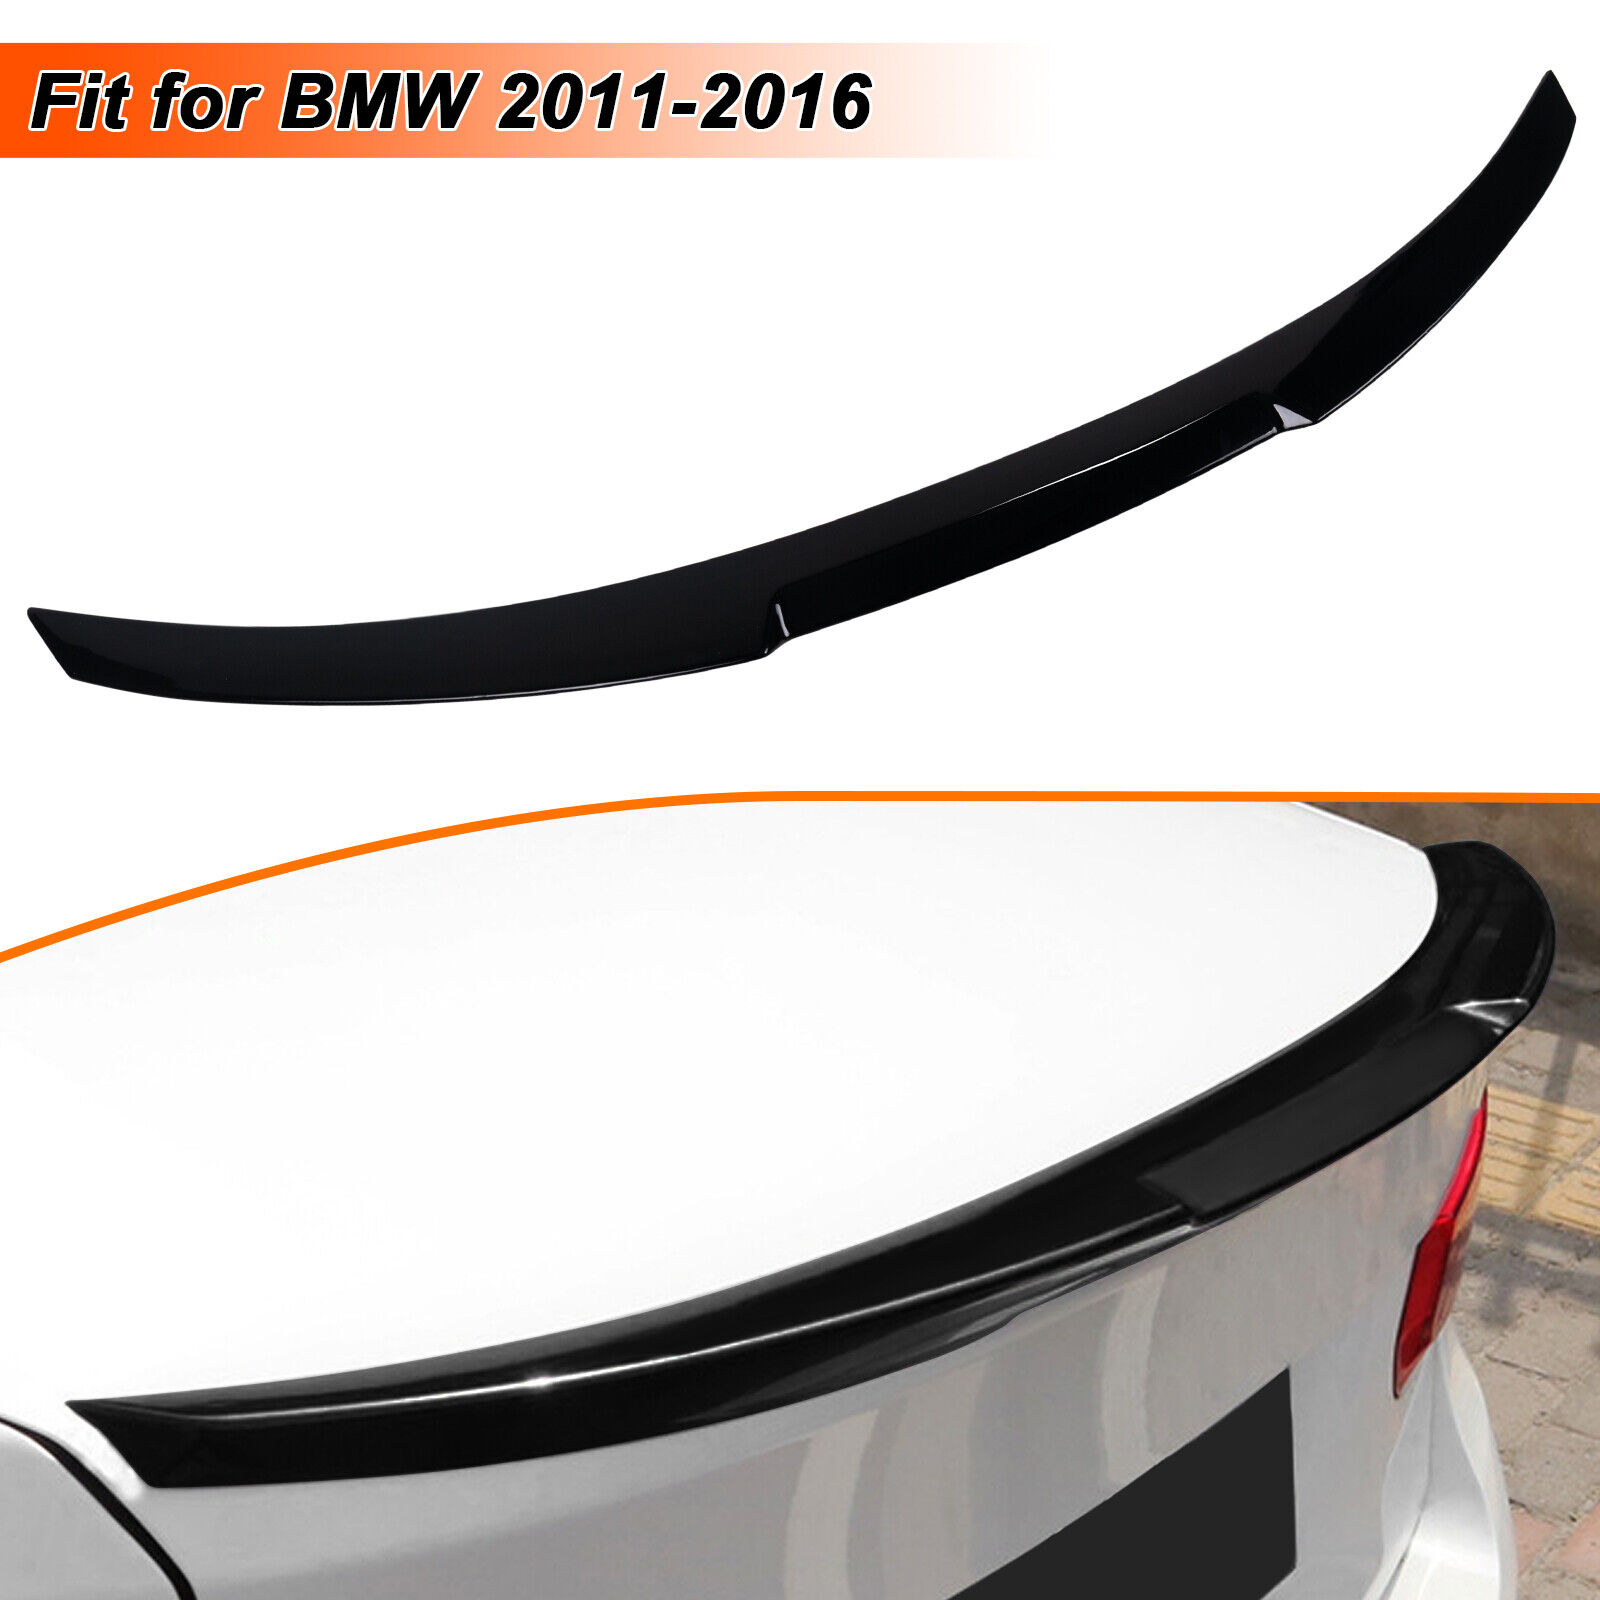 Rear Trunk Spoiler Wing Fit for BMW F10 520i 528i 535i 2011-2016 Glossy Black